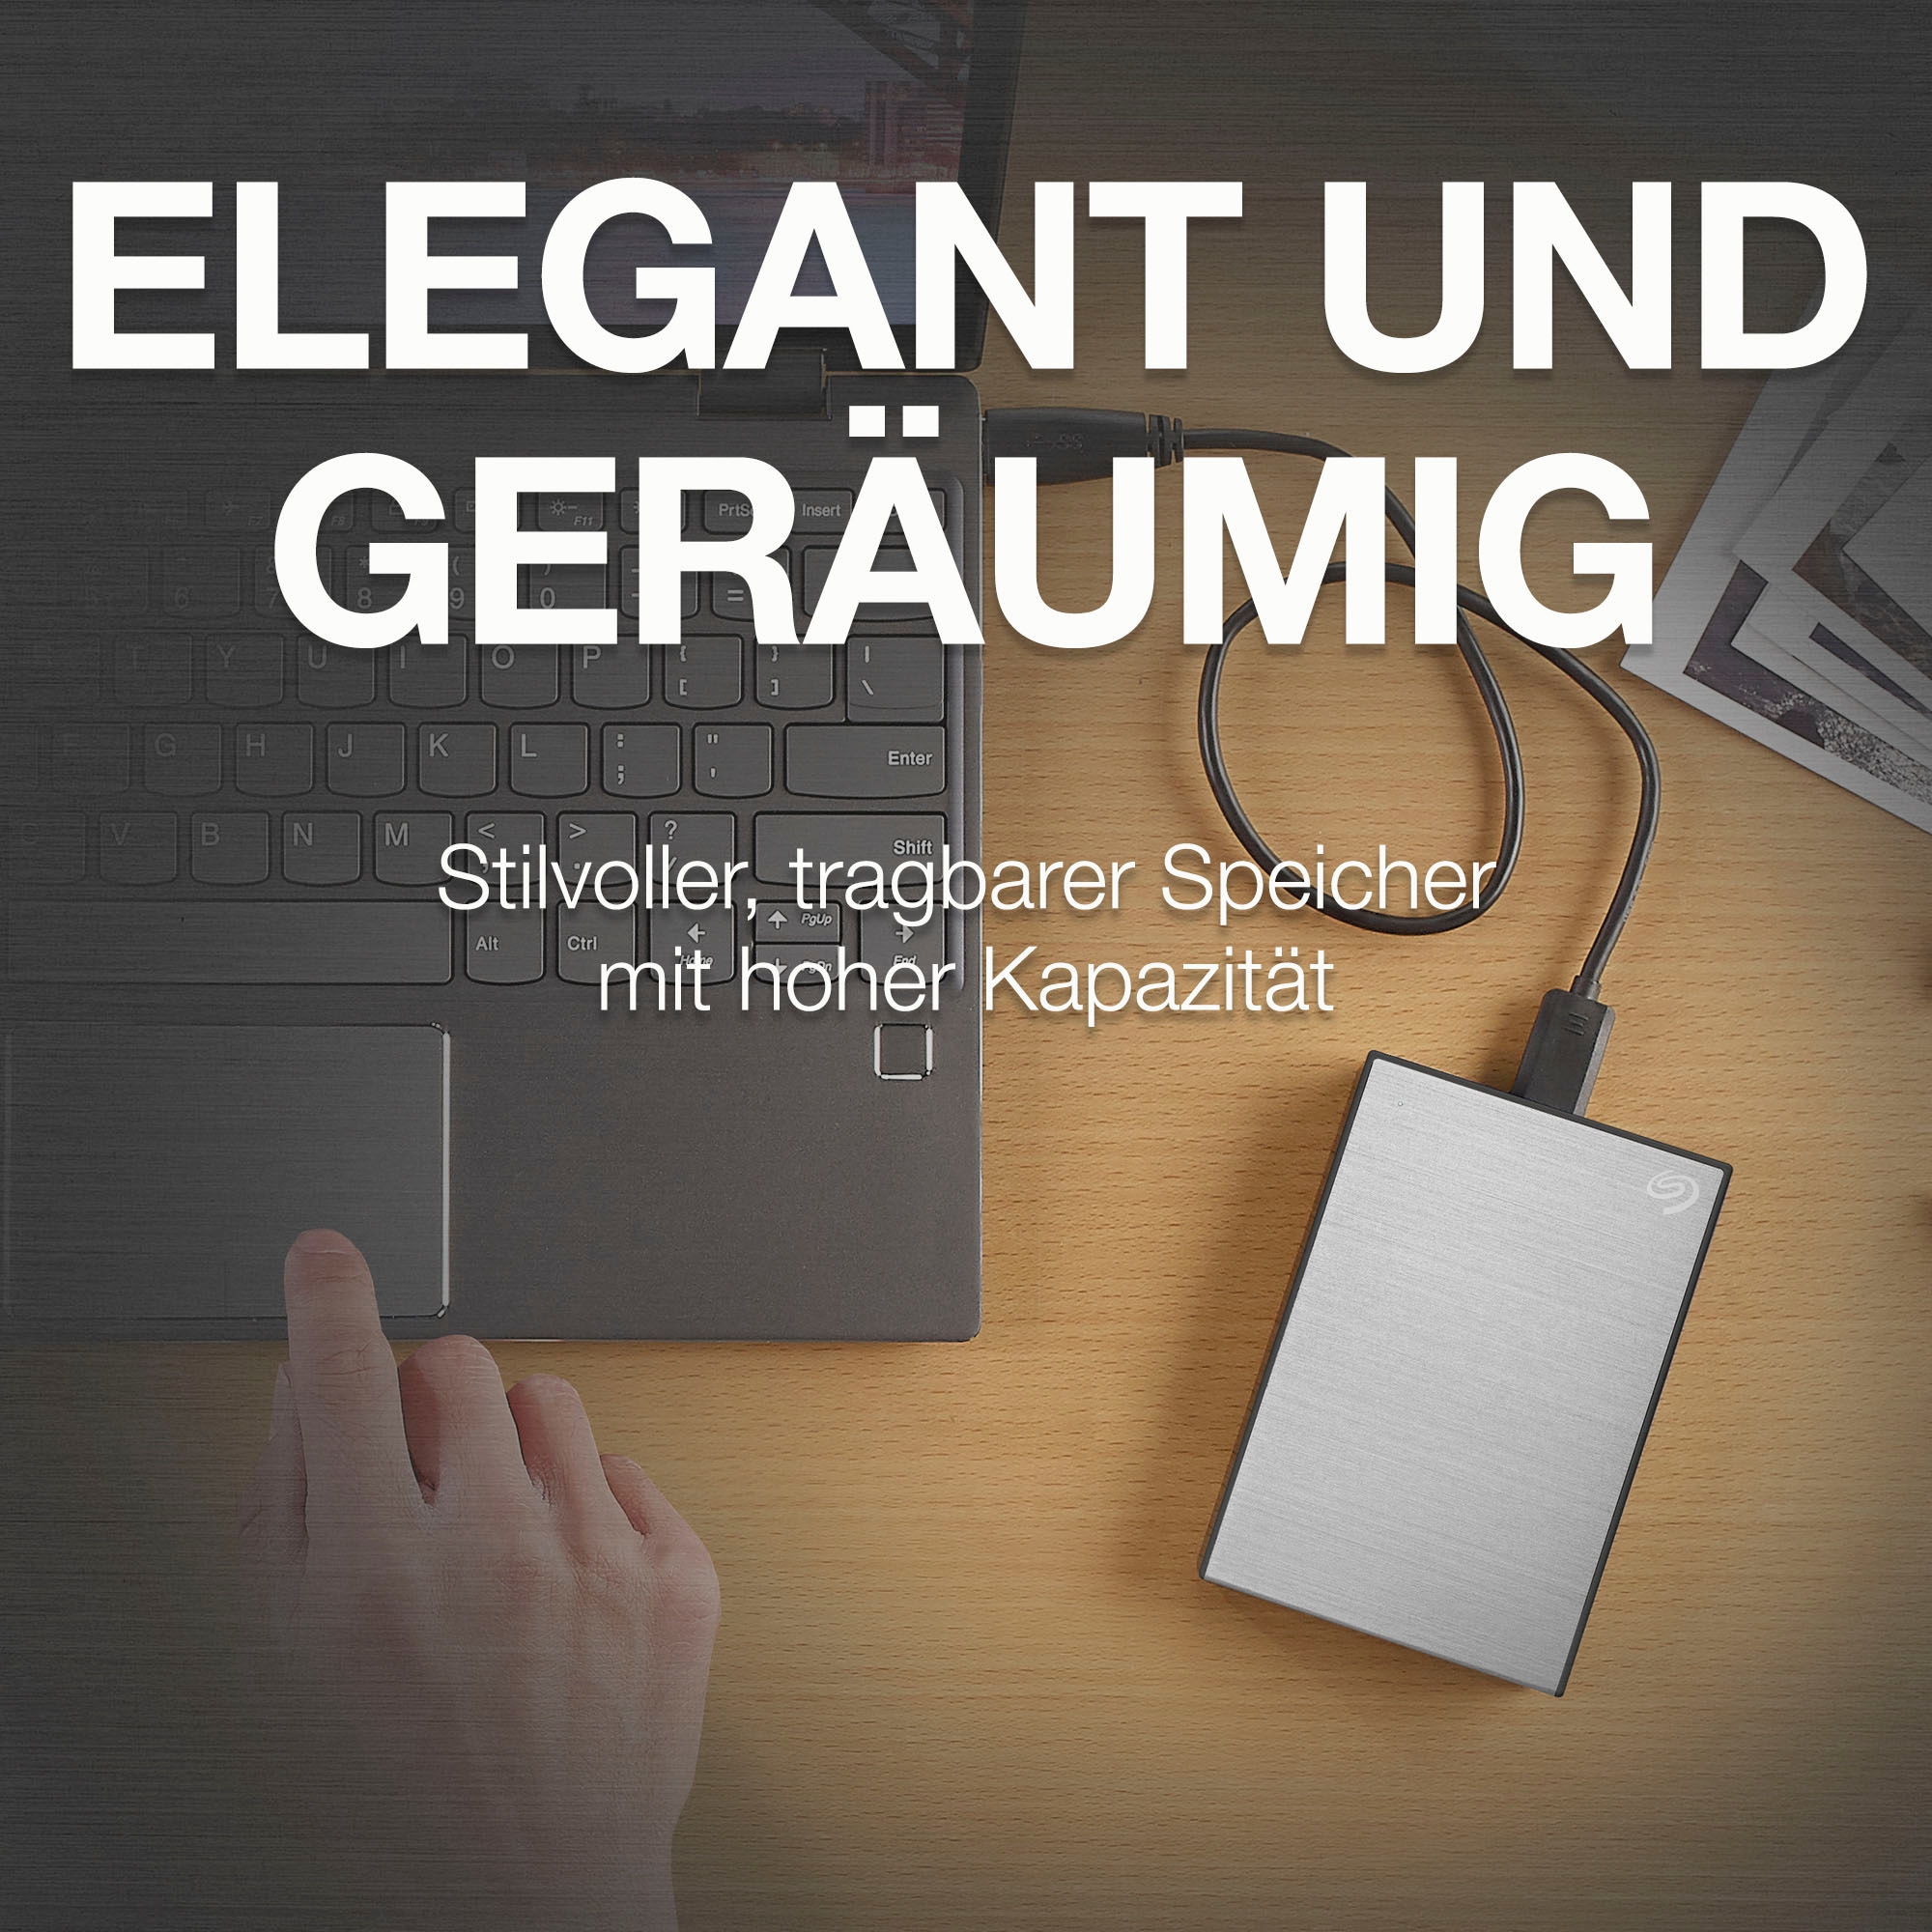 Zoll, 1TB«, Rescue HDD-Festplatte ➥ Services 2 externe USB 2,5 | Seagate Portable Garantie 3.2, Drive Recovery UNIVERSAL XXL Data Jahre Inklusive 3 Touch Jahre »One Anschluss